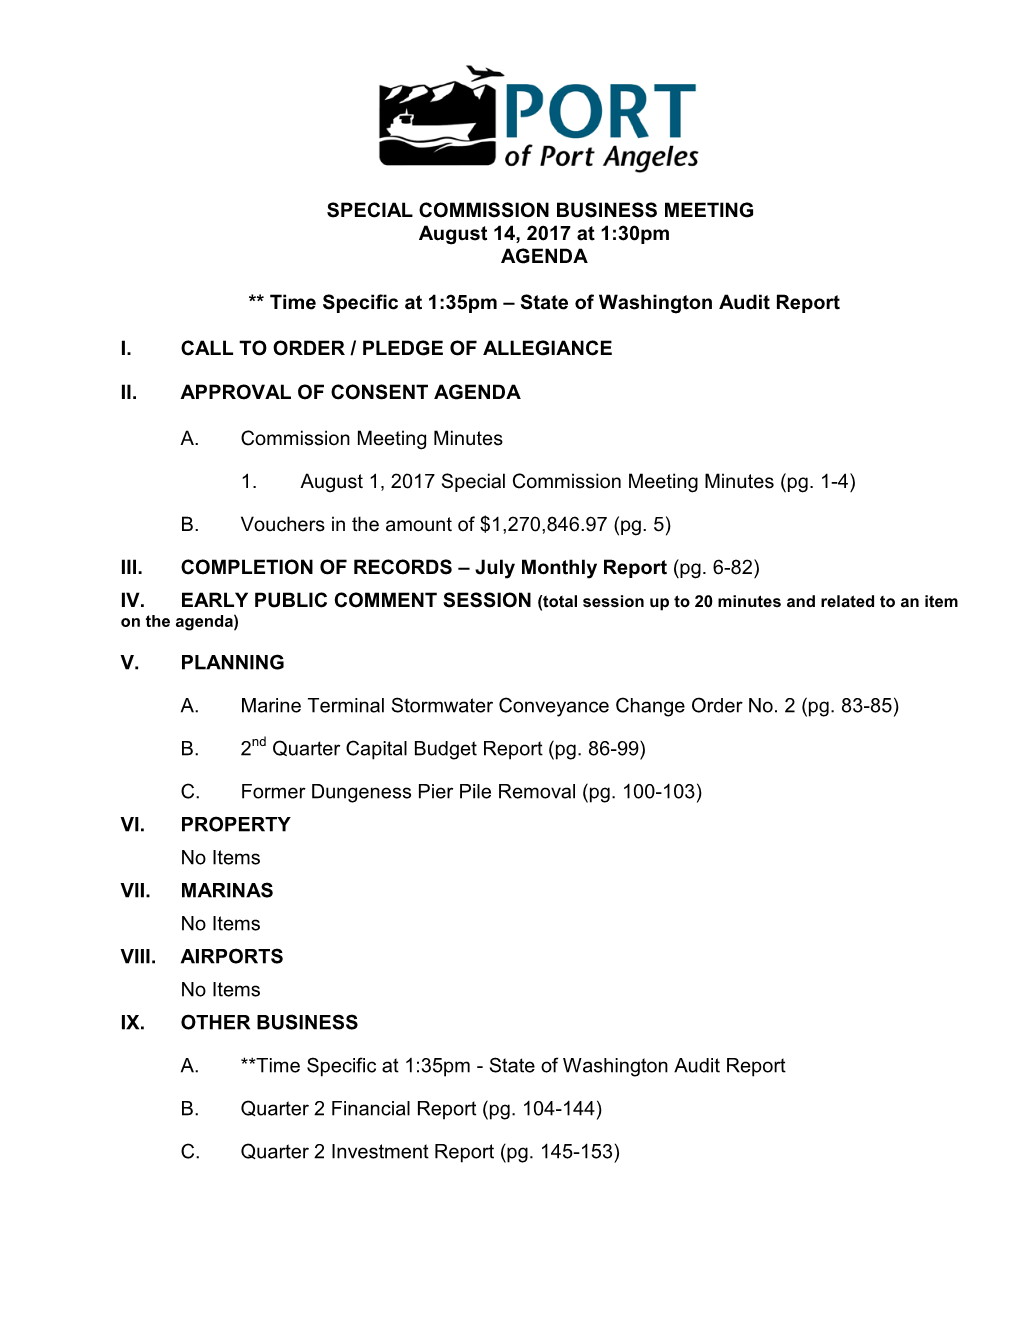 SPECIAL COMMISSION BUSINESS MEETING August 14, 2017 at 1:30Pm AGENDA